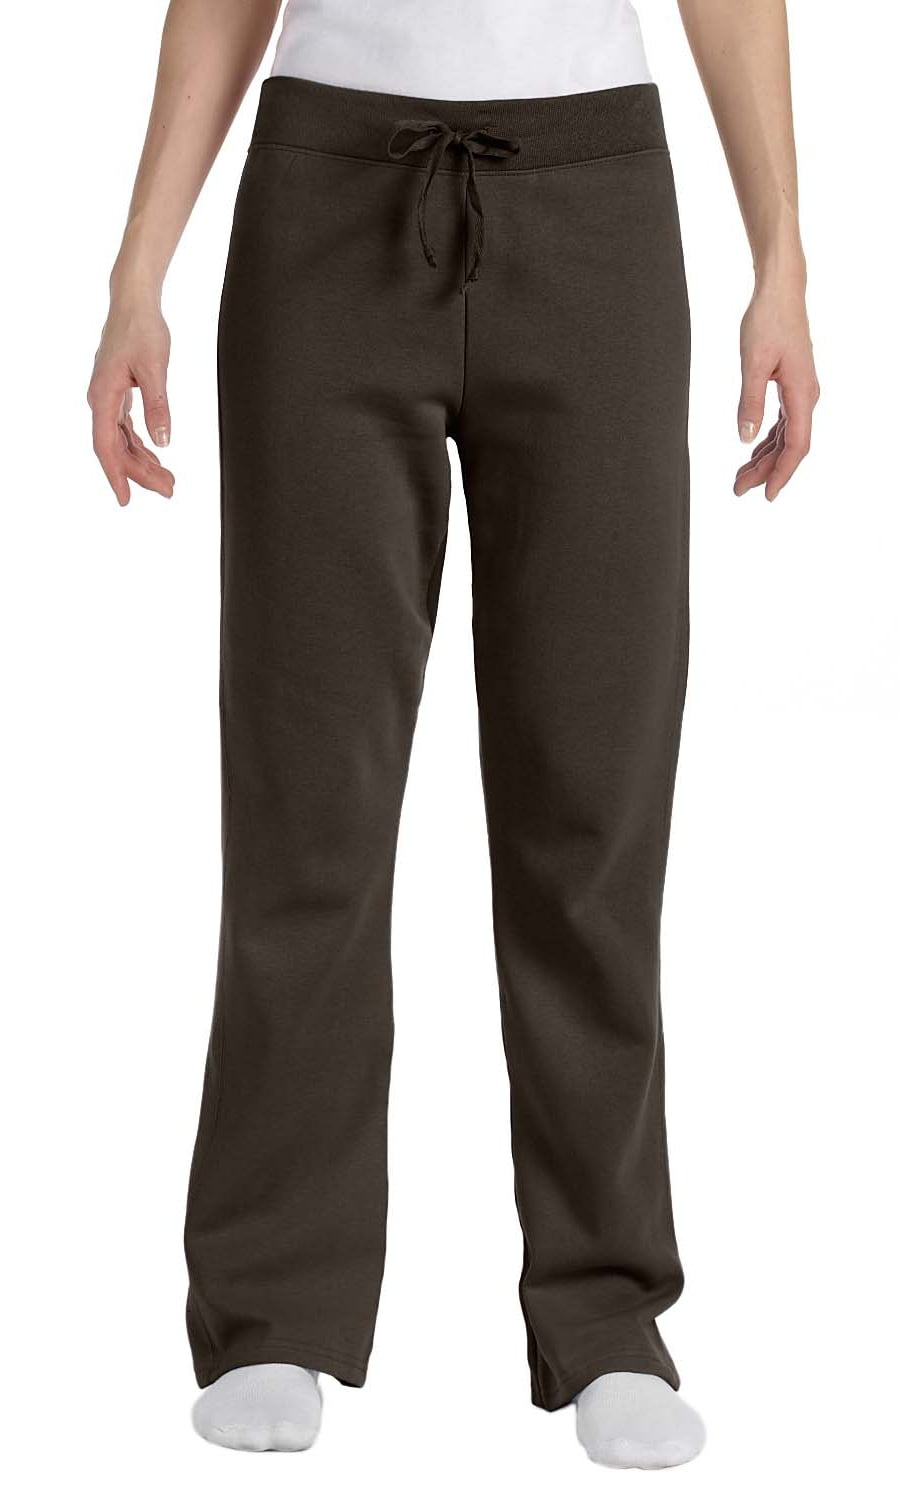 A pair of grey women's sweatpants with a drawstring waist and banded cuffs